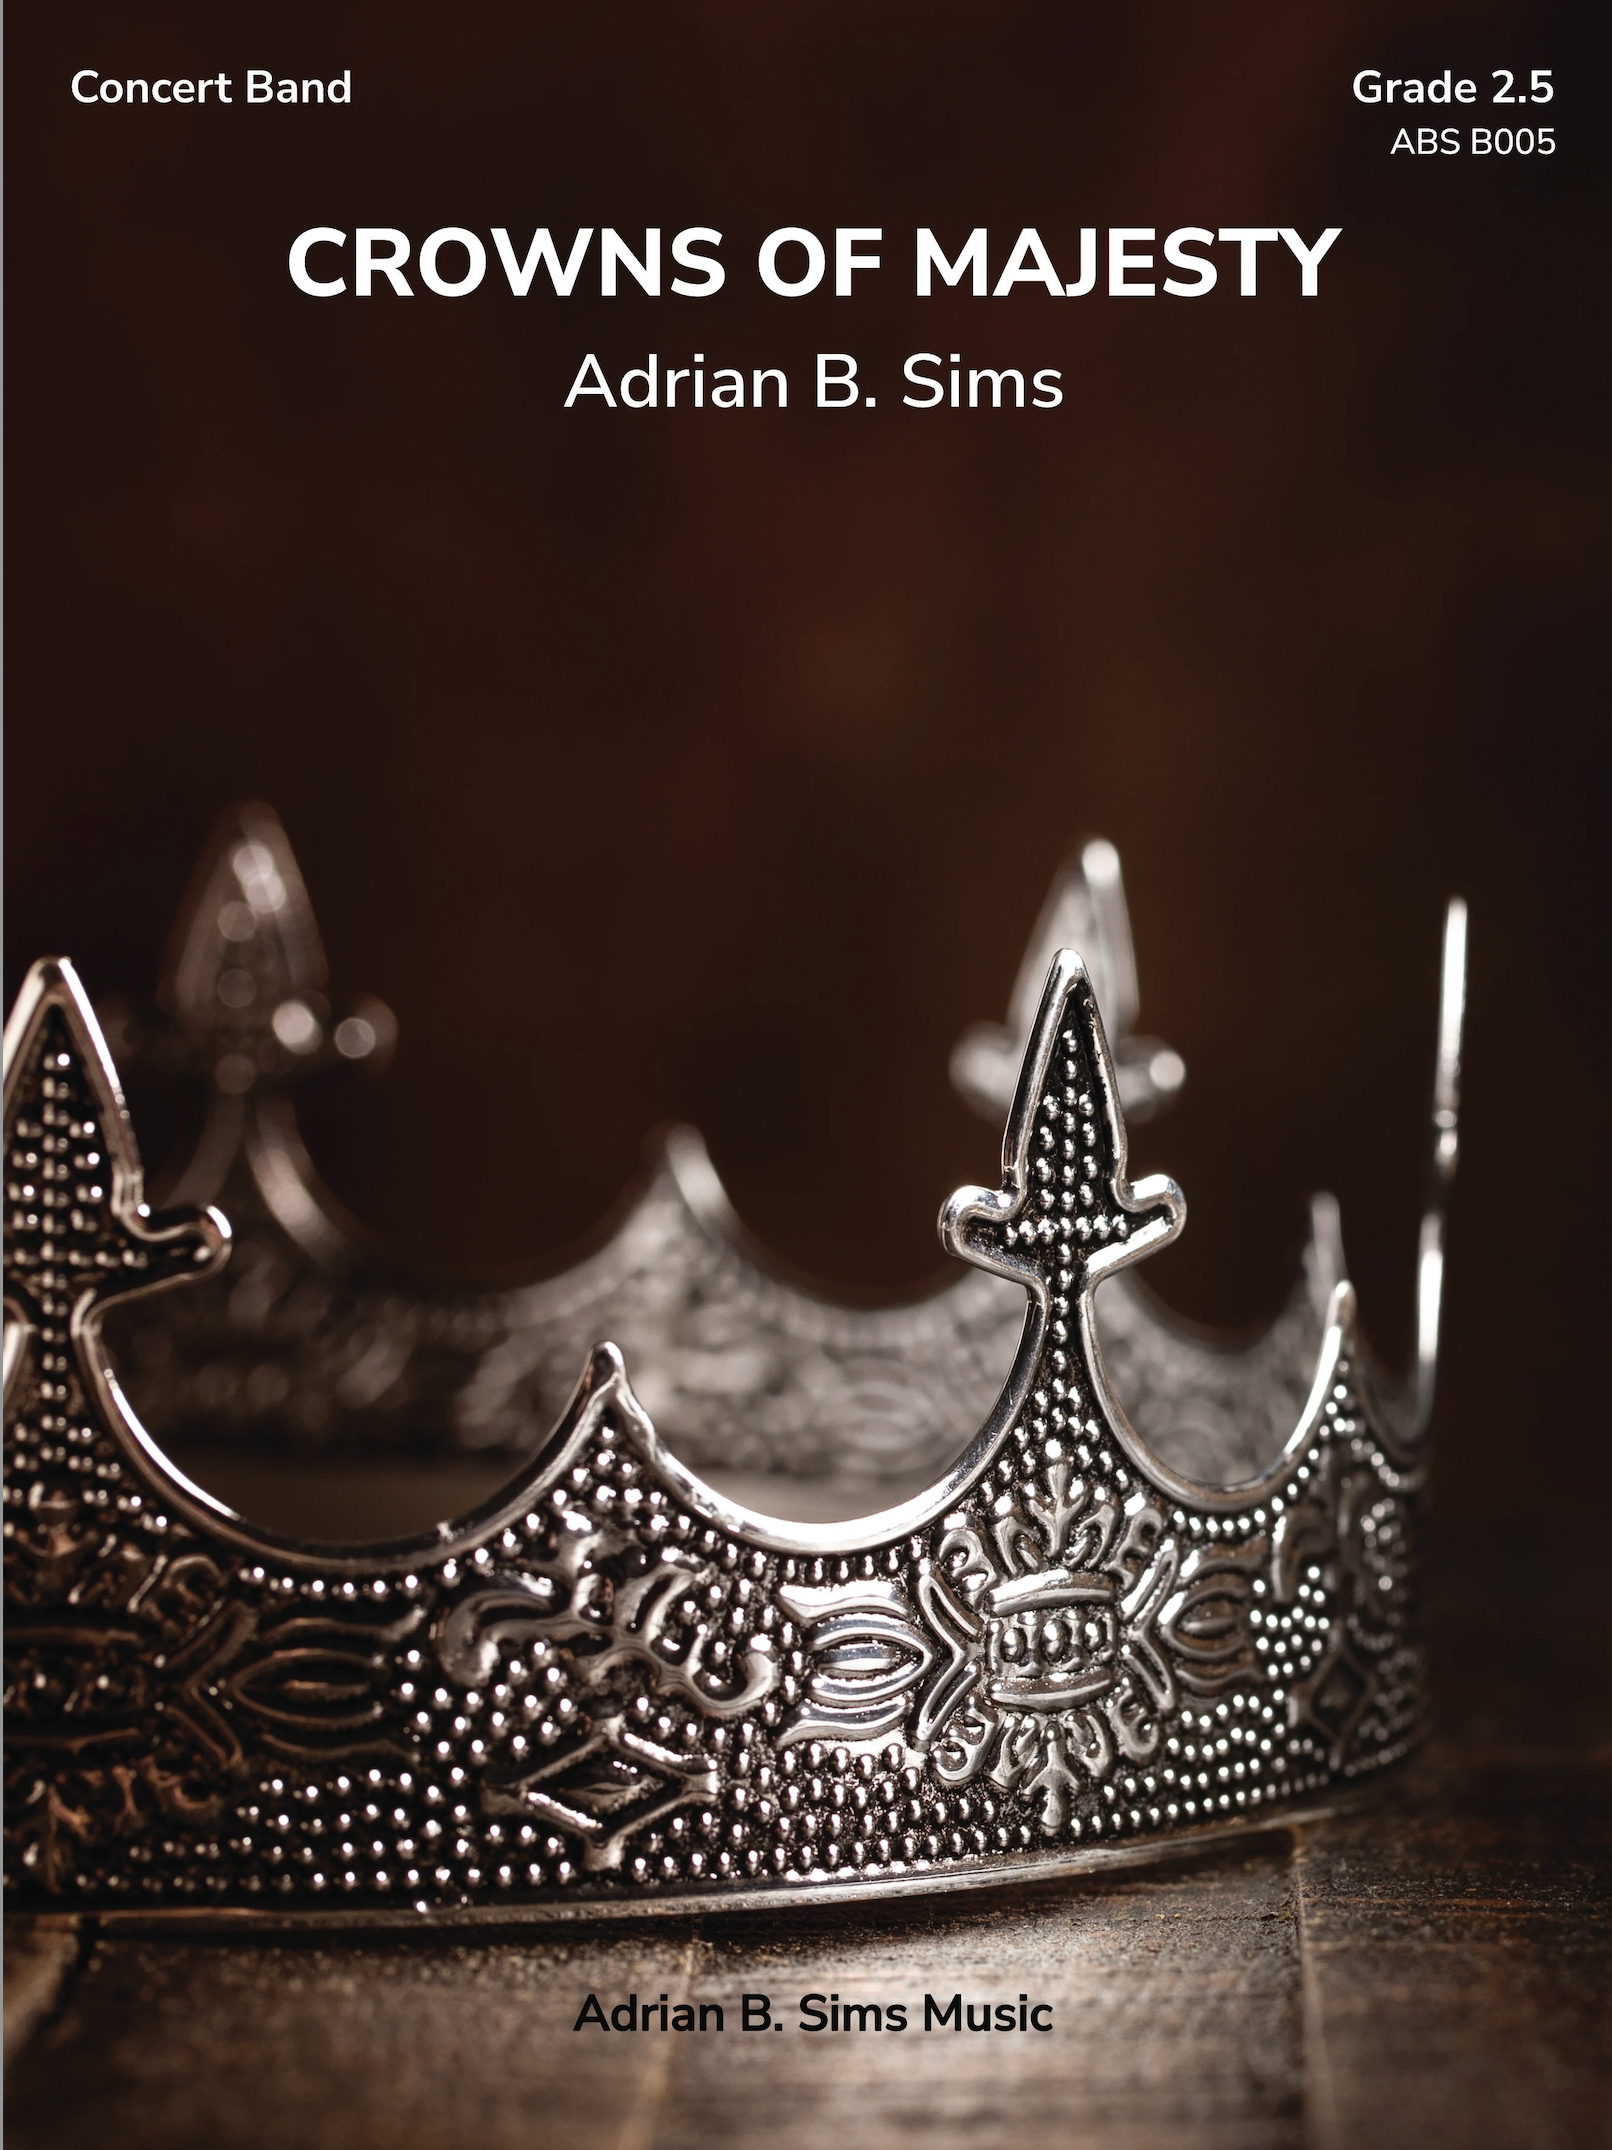 Crowns Of Majesty by Adrian B. Sims